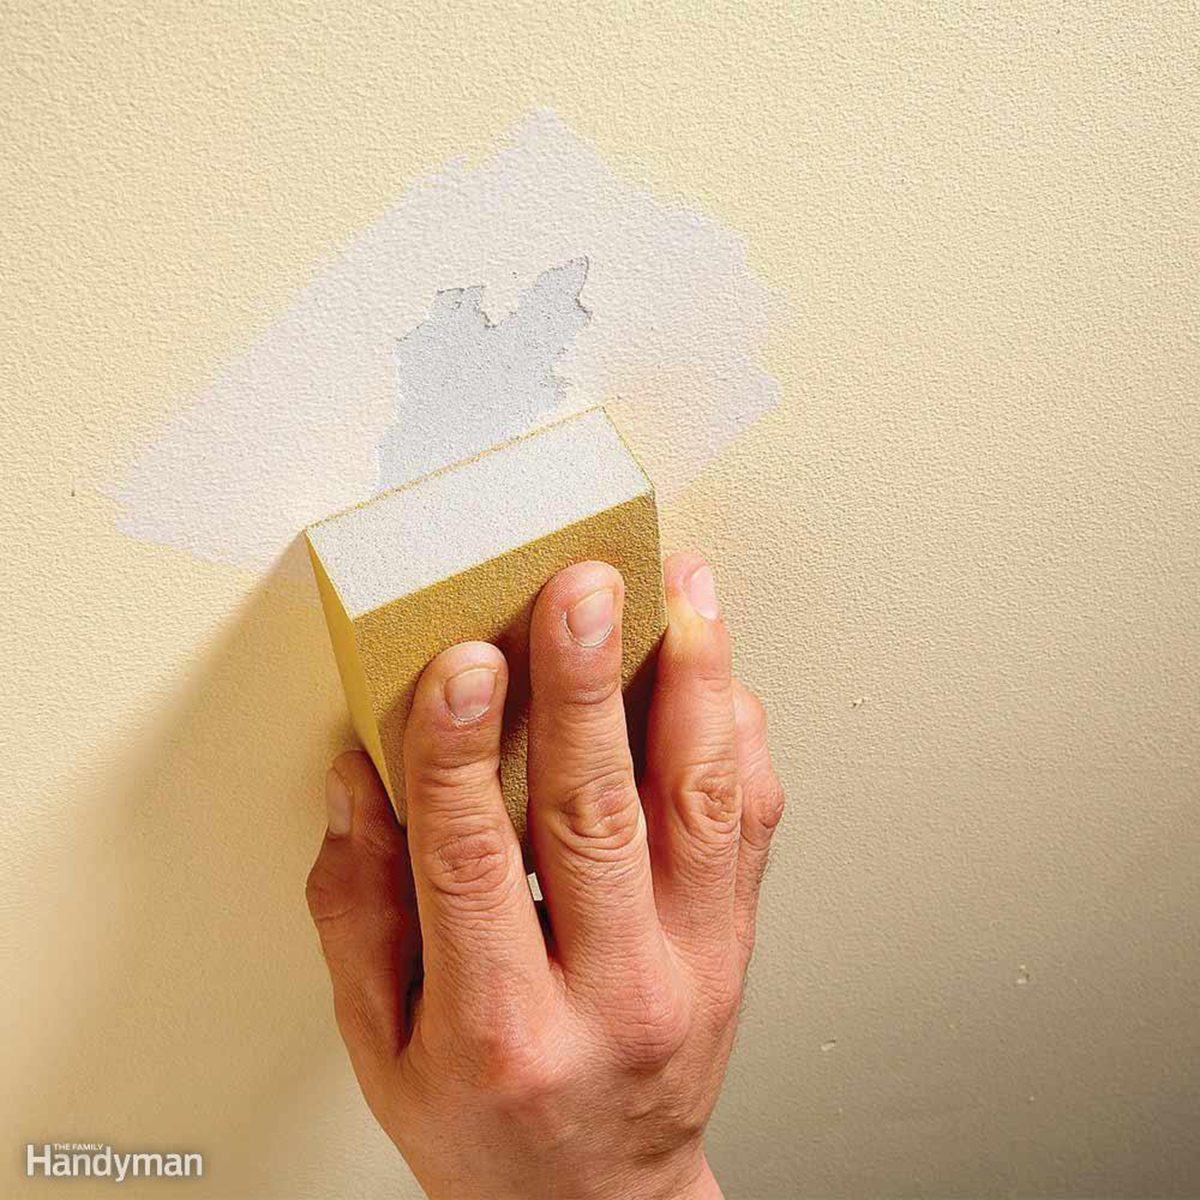 Sanding over a defect in the wall